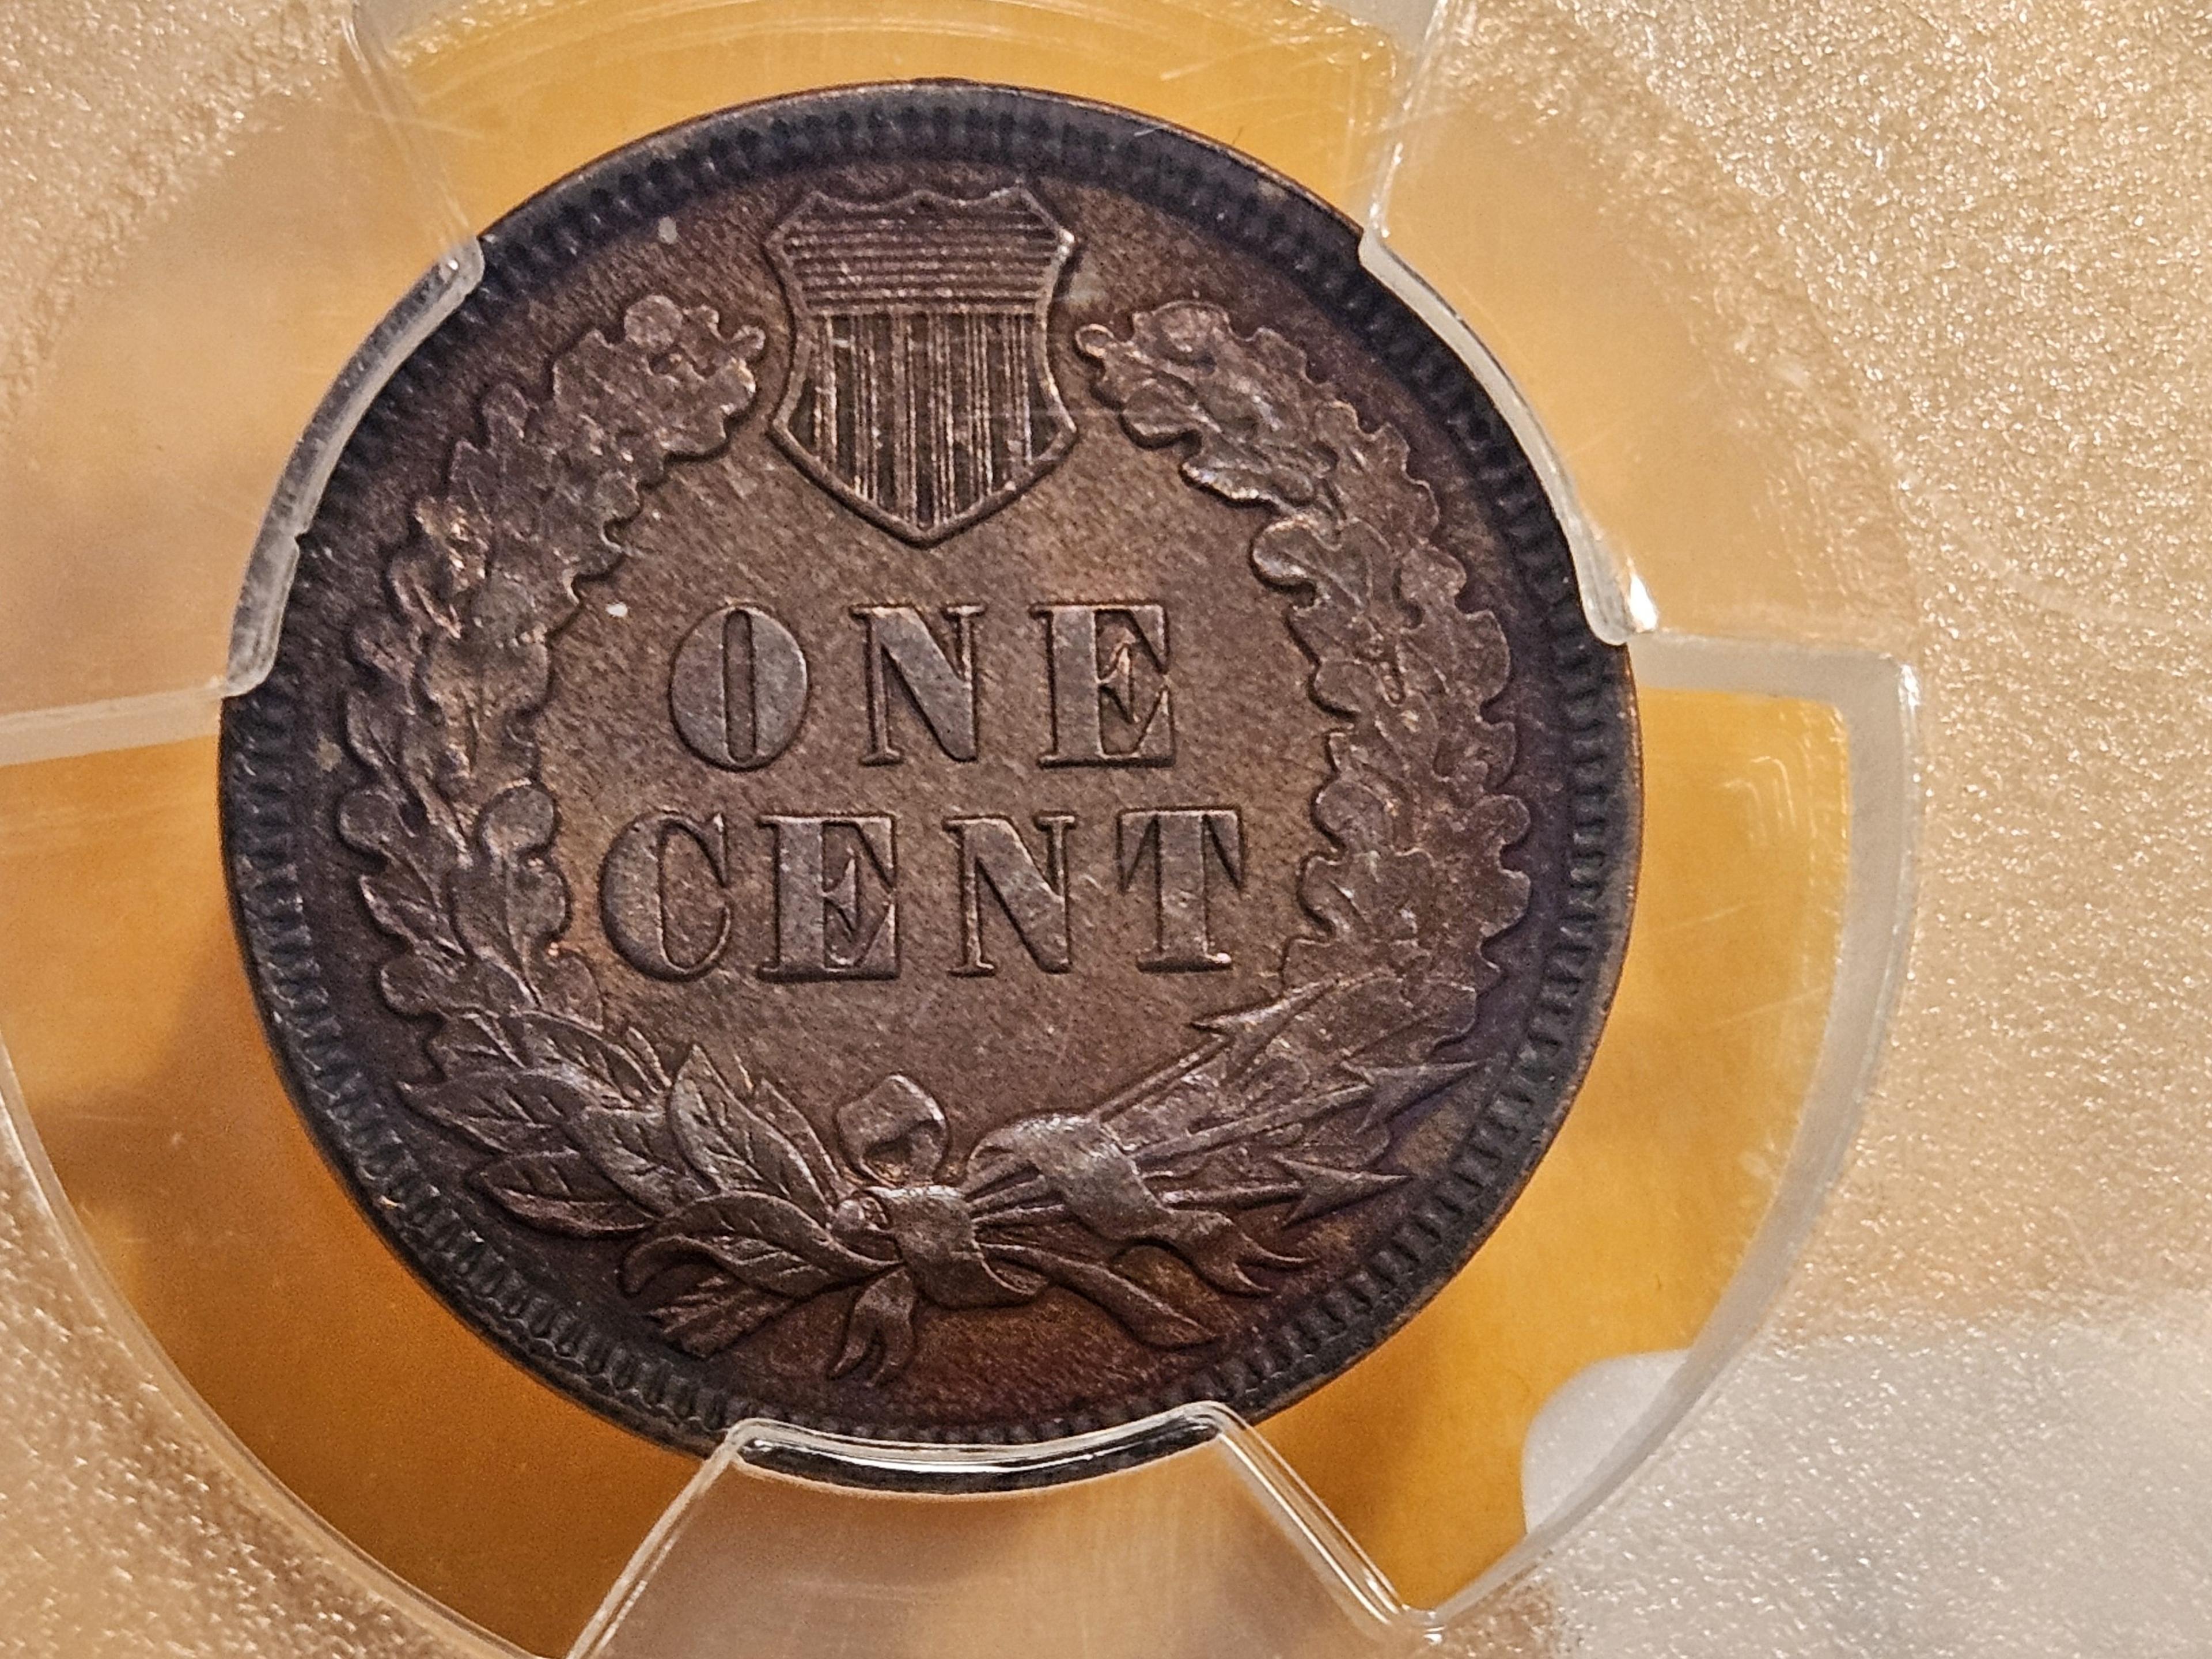 PCGS 1907 Indian Cent in Choice Uncirculated - details